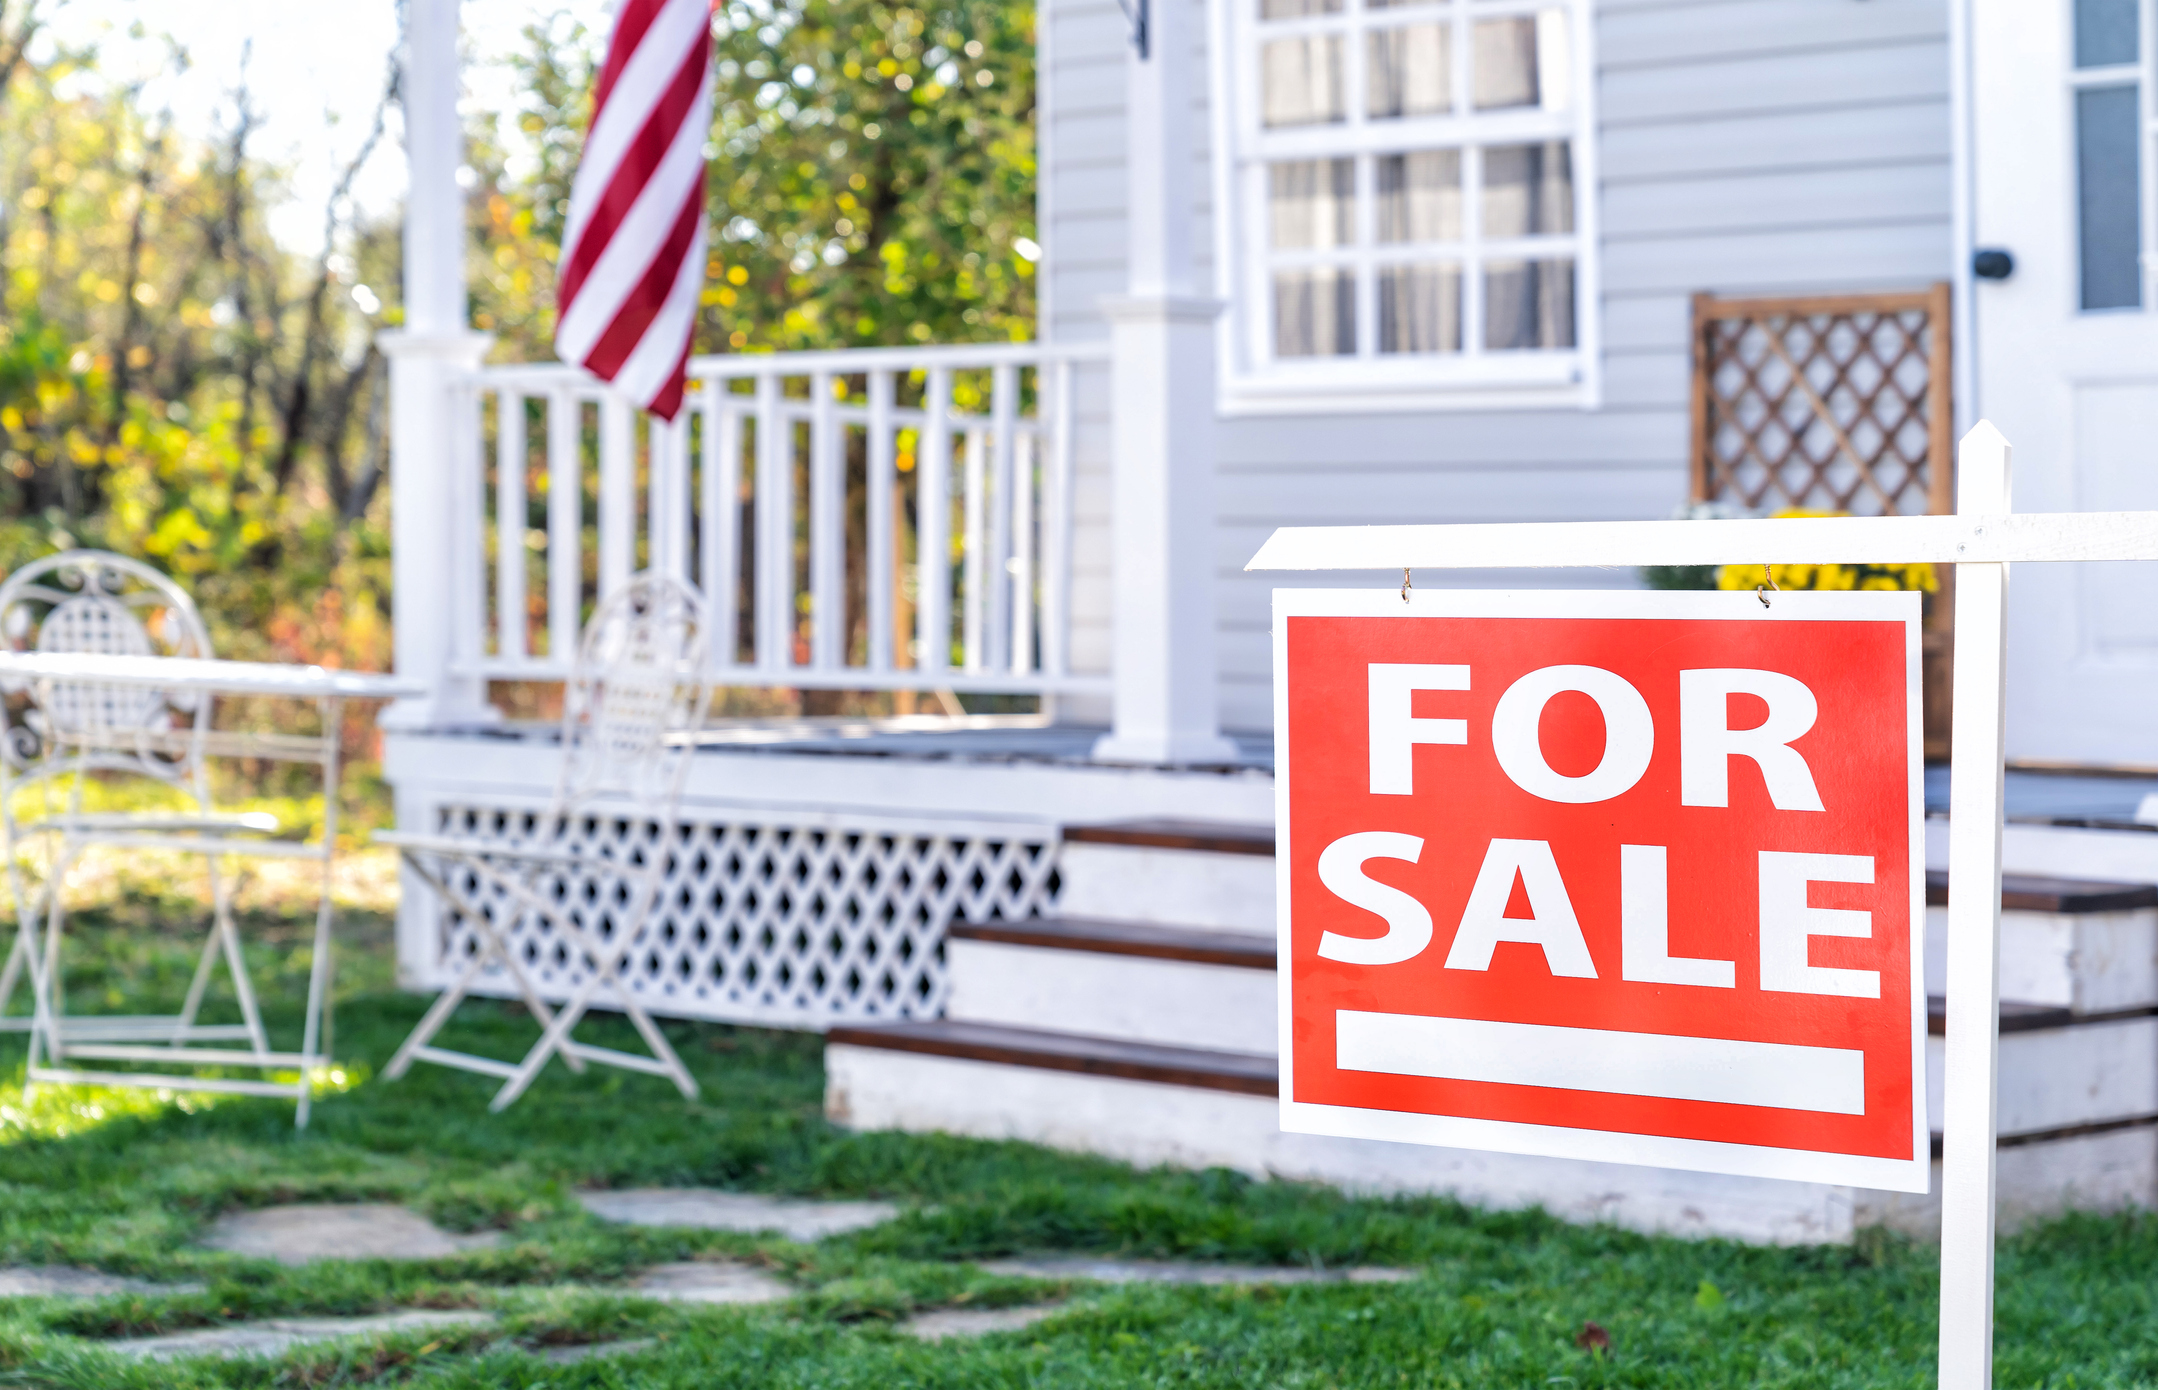 FIVE COMMON HOME PRICING MISTAKES AND HOW TO AVOID THEM